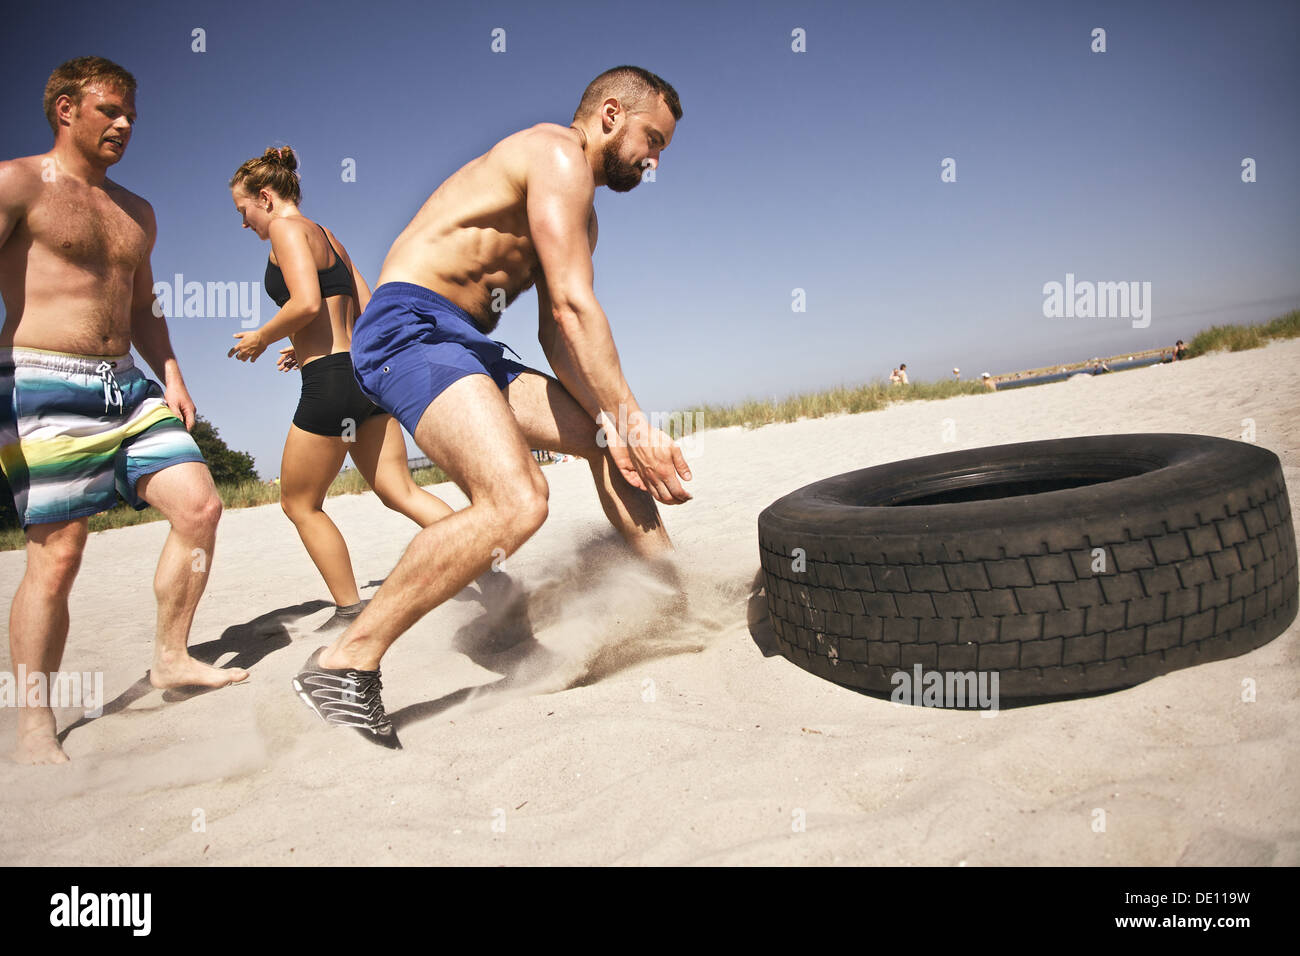 Strong male athlete about to flip a truck tire. Young people doing crossfit exercise on beach on a sunny day. Stock Photo